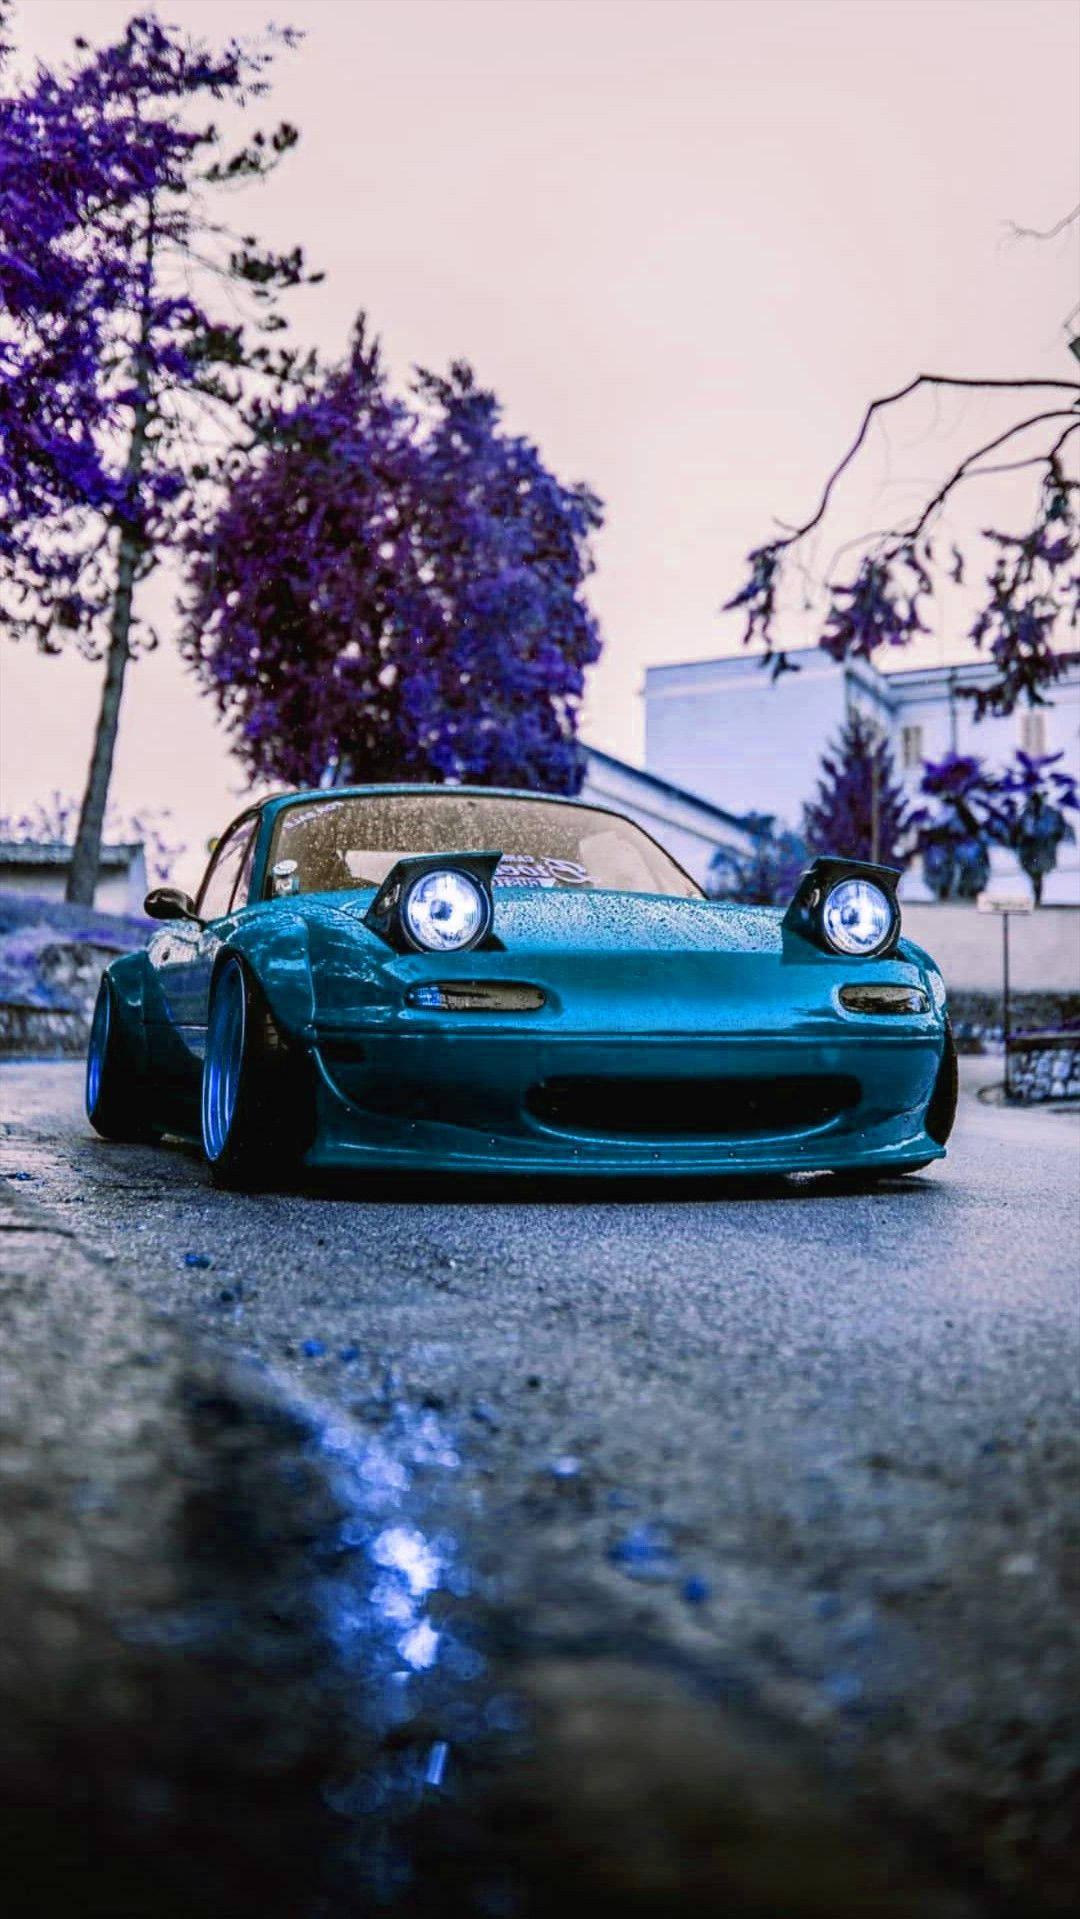 Blue Jdm Car With Funny Face Wallpaper